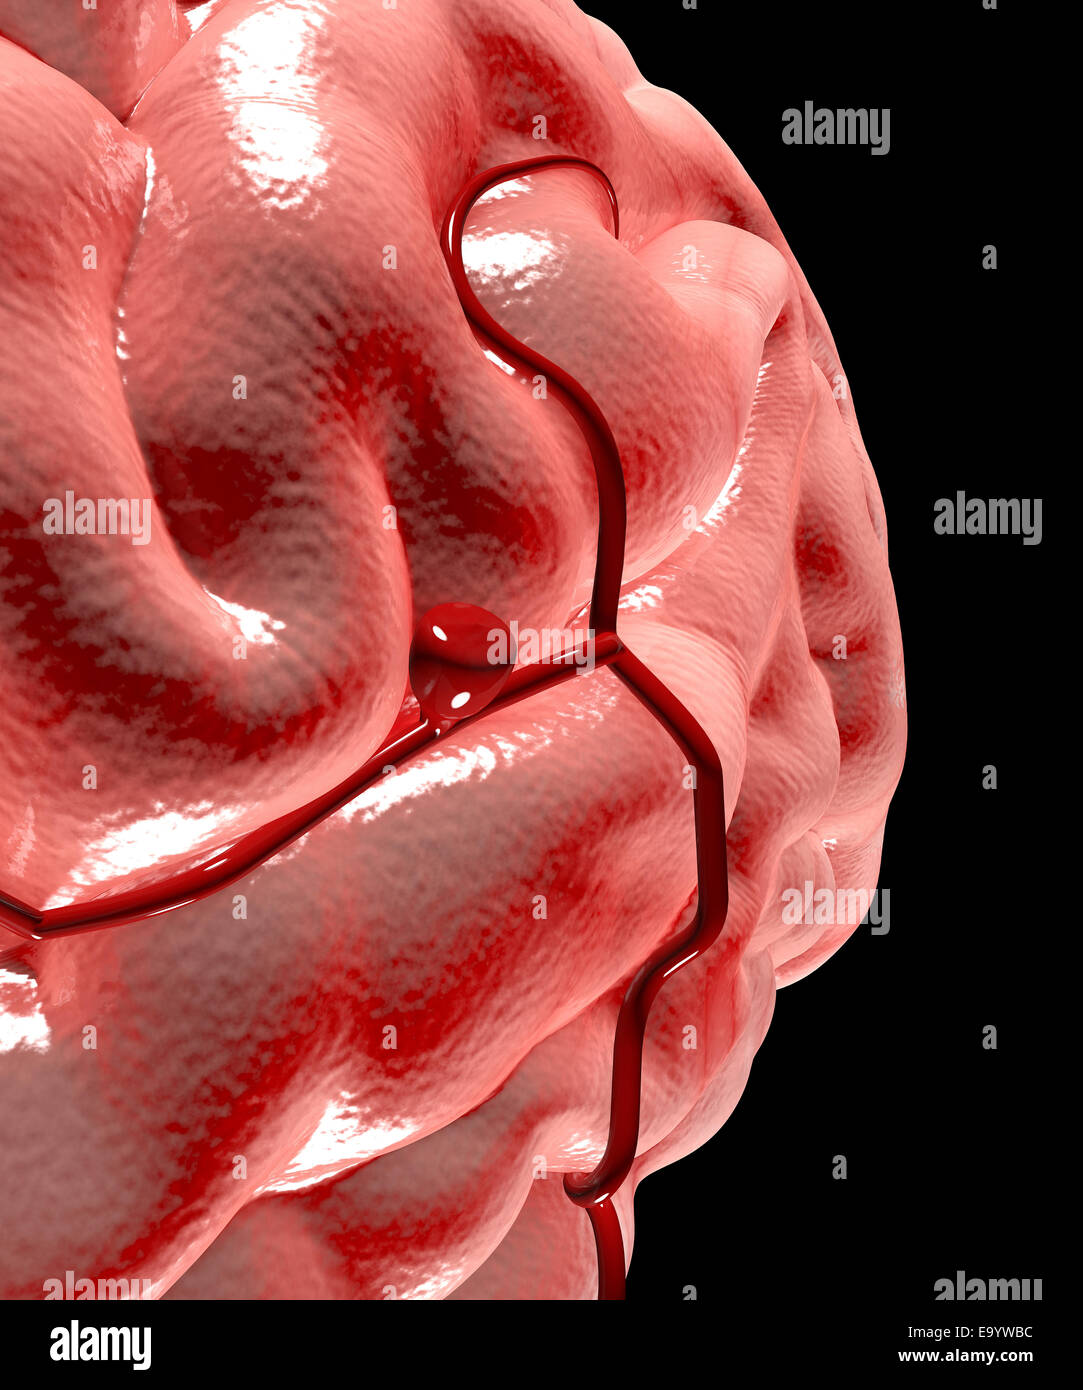 Enlargement of the brain with cerebral aneurysm Stock Photo